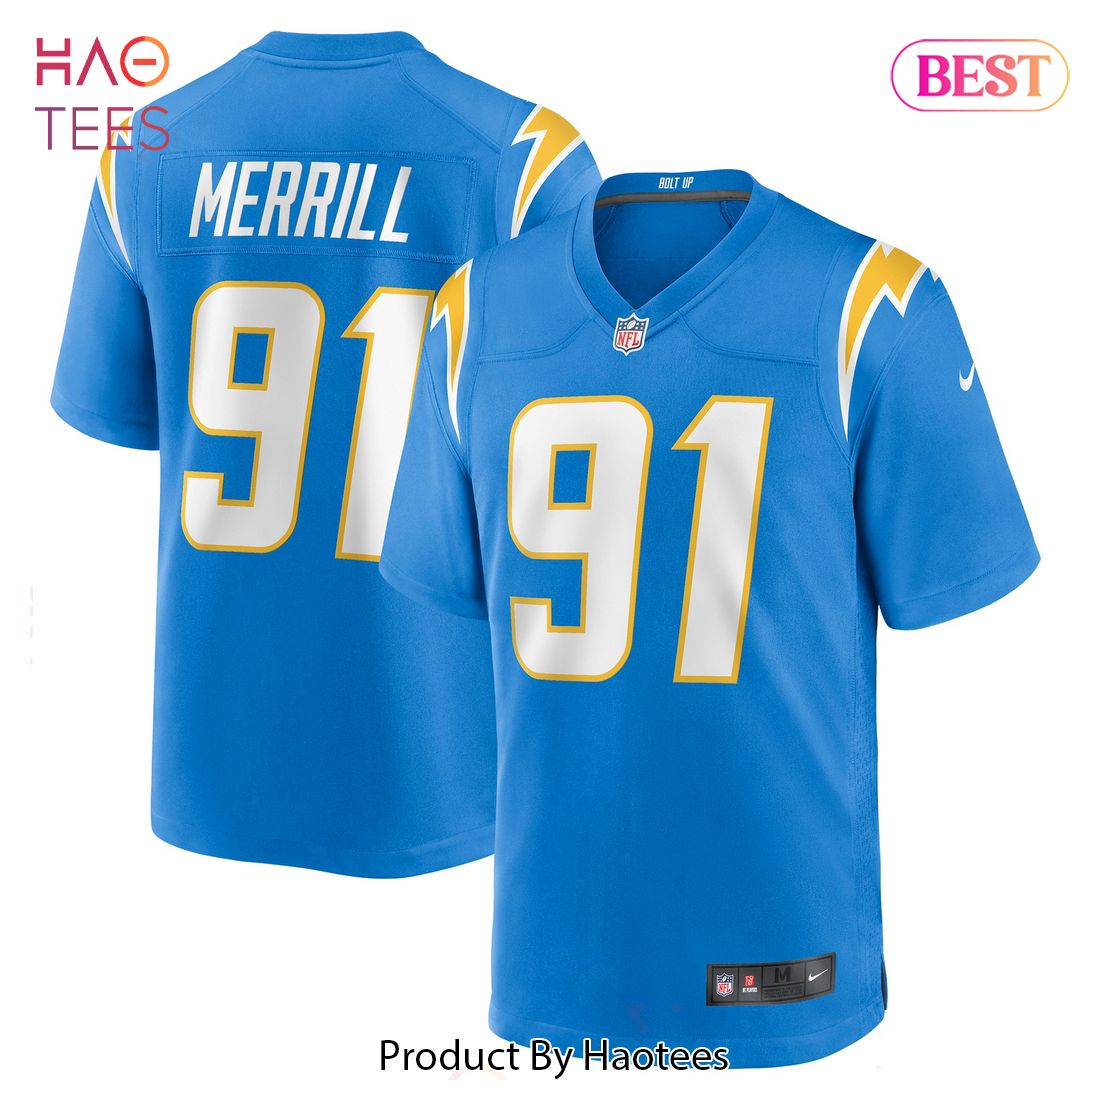 Forrest Merrill Los Angeles Chargers Nike Player Game Jersey Powder Blue